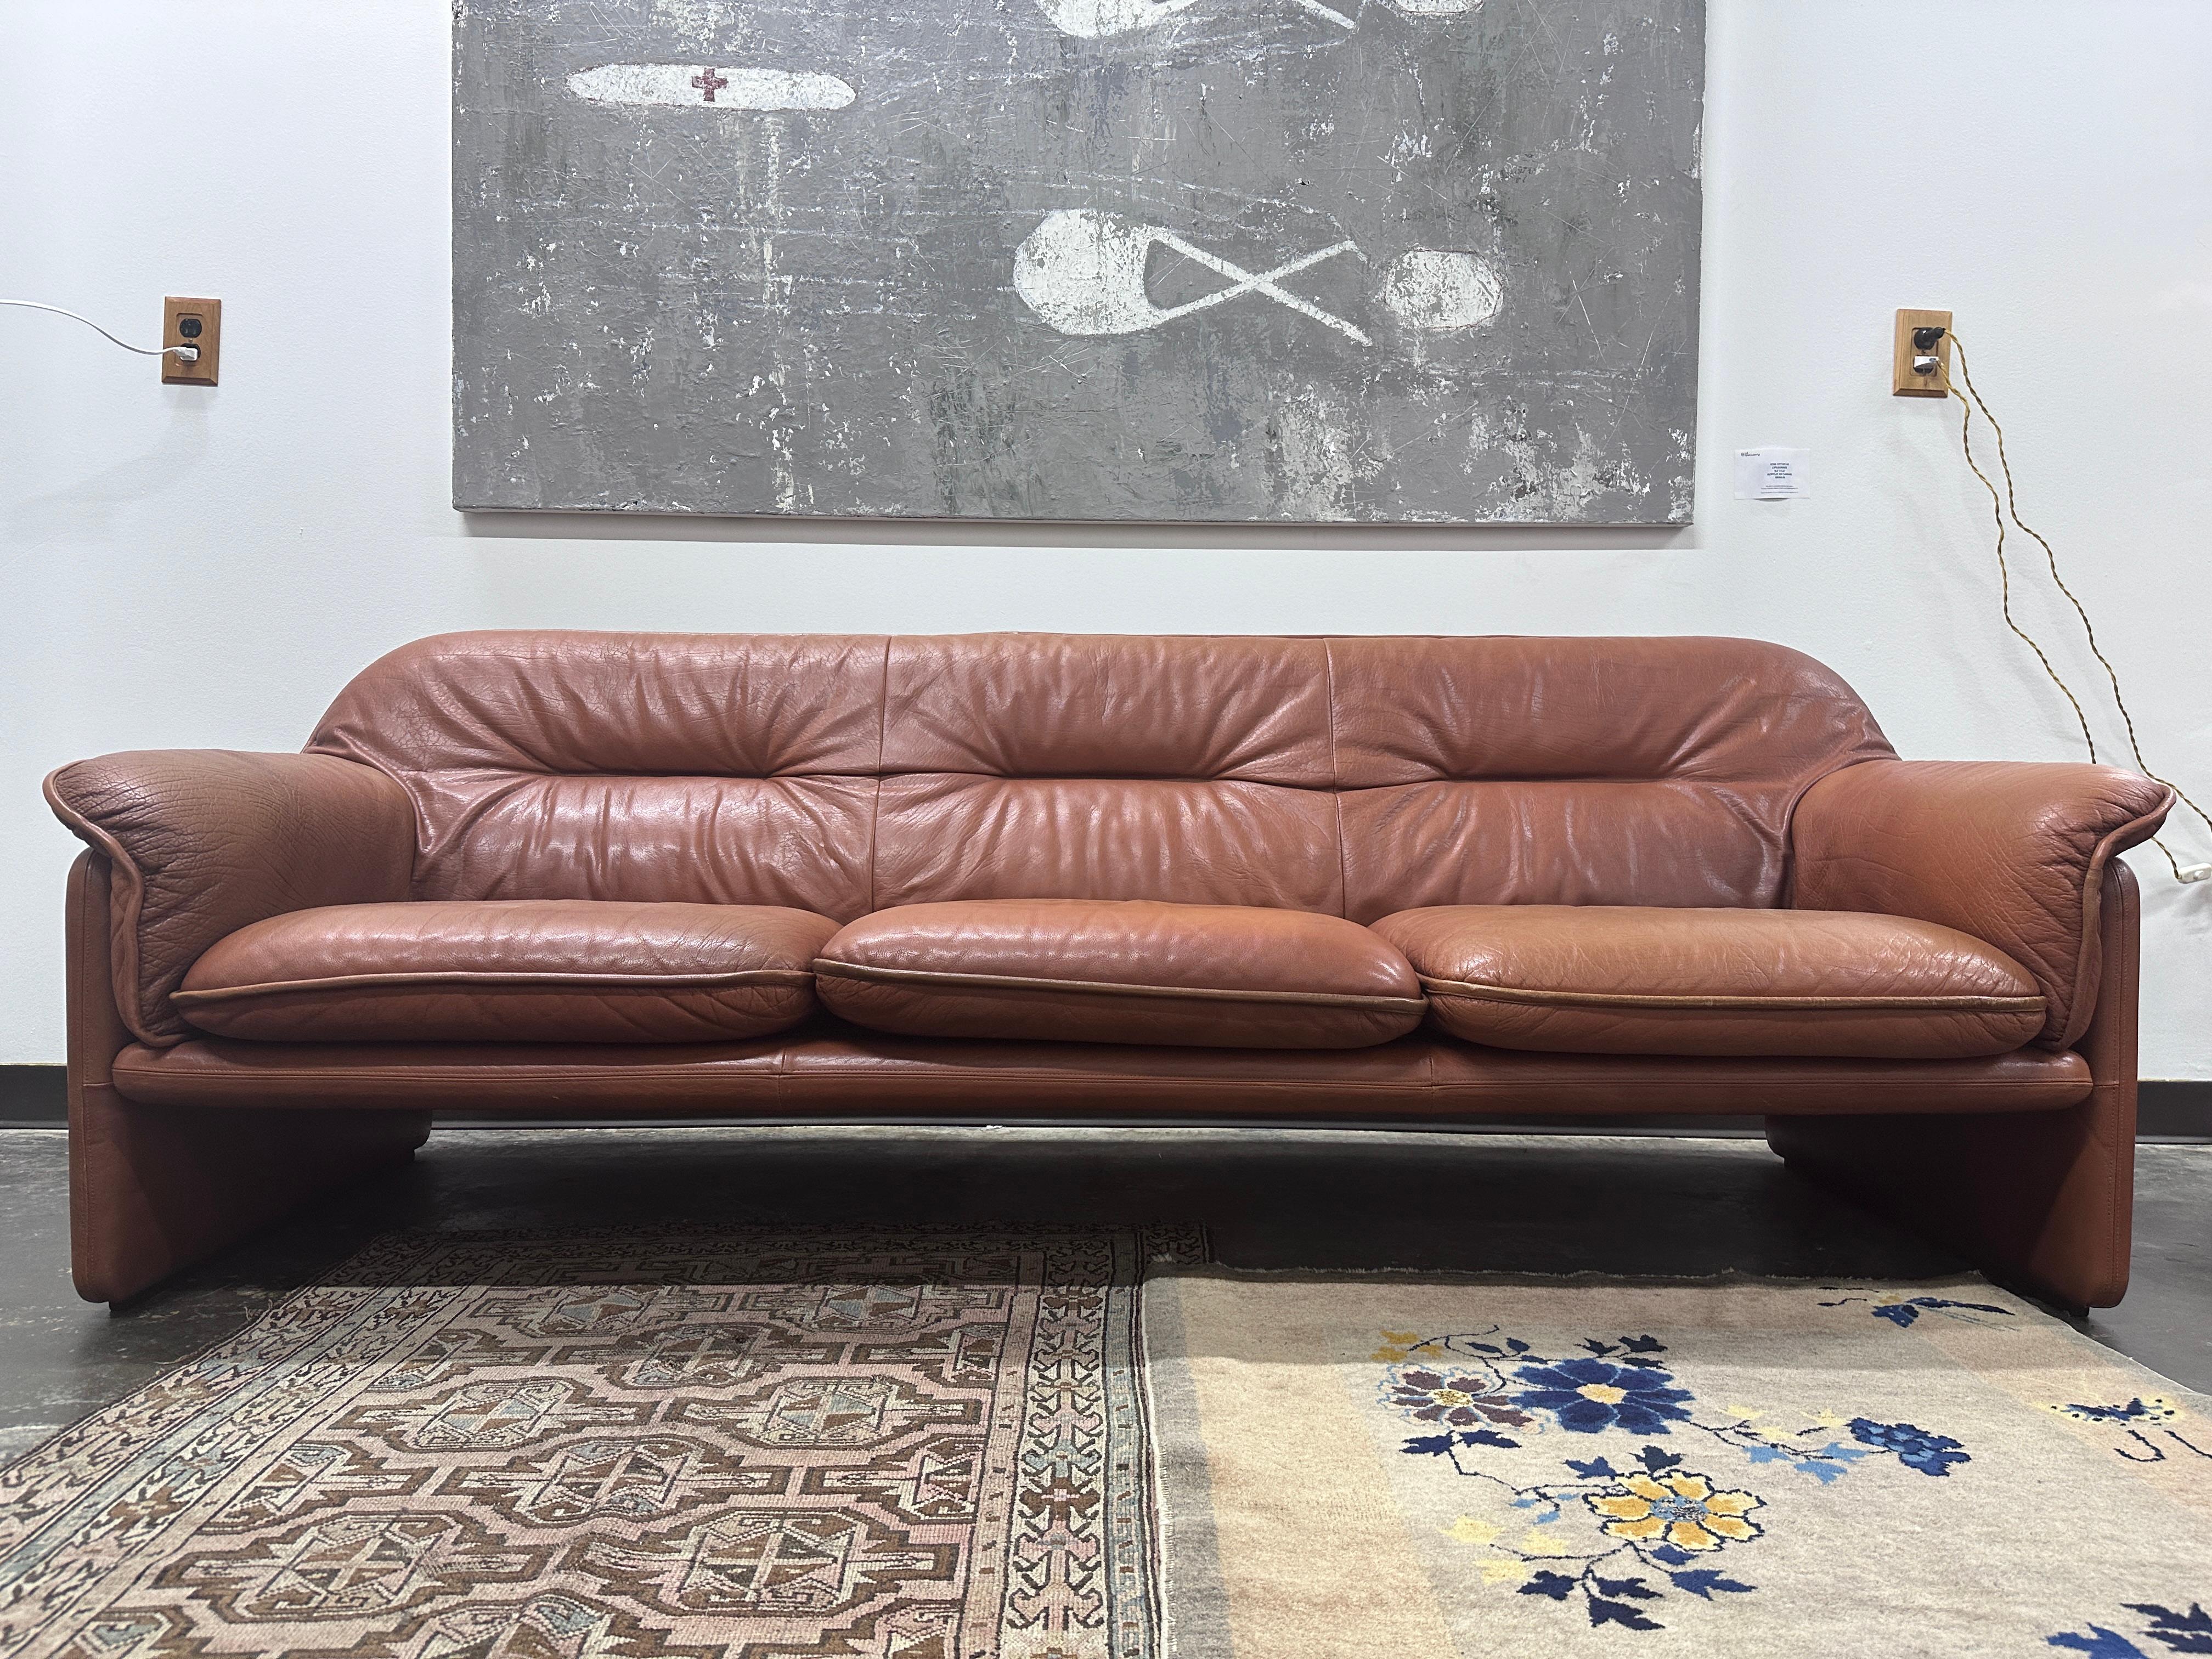 DS16 three-seater sofa by De Sede in excellent vintage condition. There is minor staining and wear consistent with age. Back cushion is one large piece that removes, and there are three seat cushions.